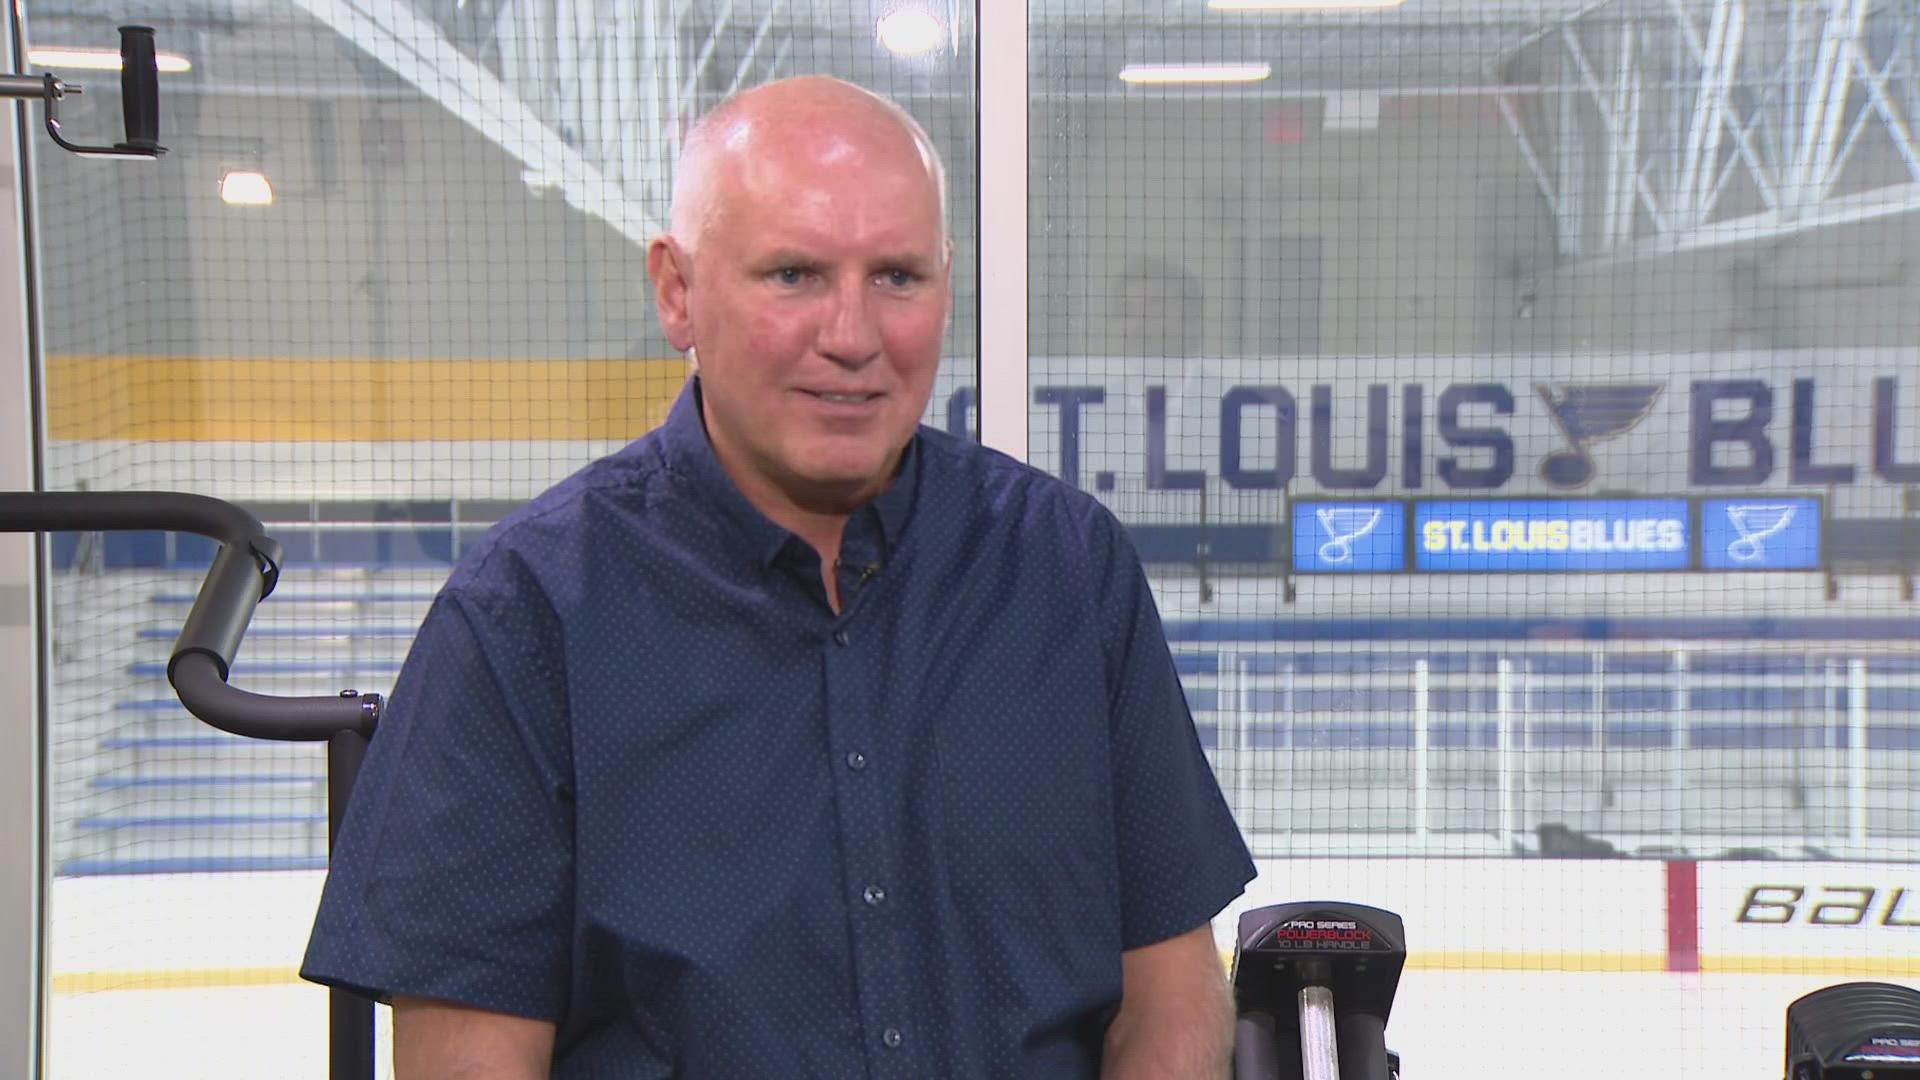 Armstrong leads the Blues into another season with high expectations. Here's what he had to tell our Frank Cusumano ahead of the 2022 season.